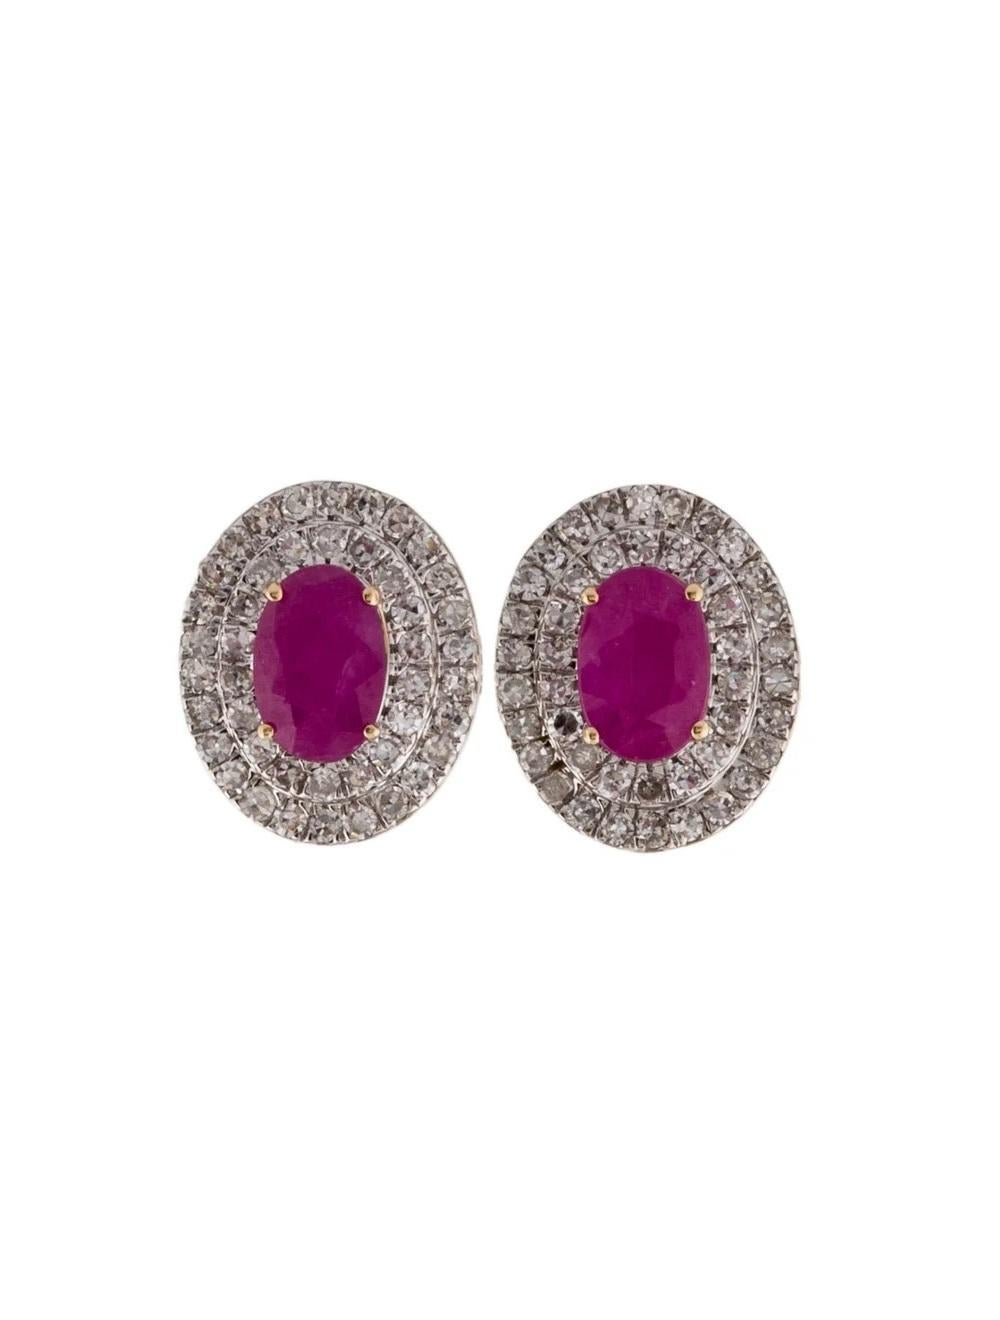 Designer 14K Ruby & Diamond Stud Earrings, 1.43ctw, Gemstone Jewelry, Luxury In New Condition For Sale In Holtsville, NY